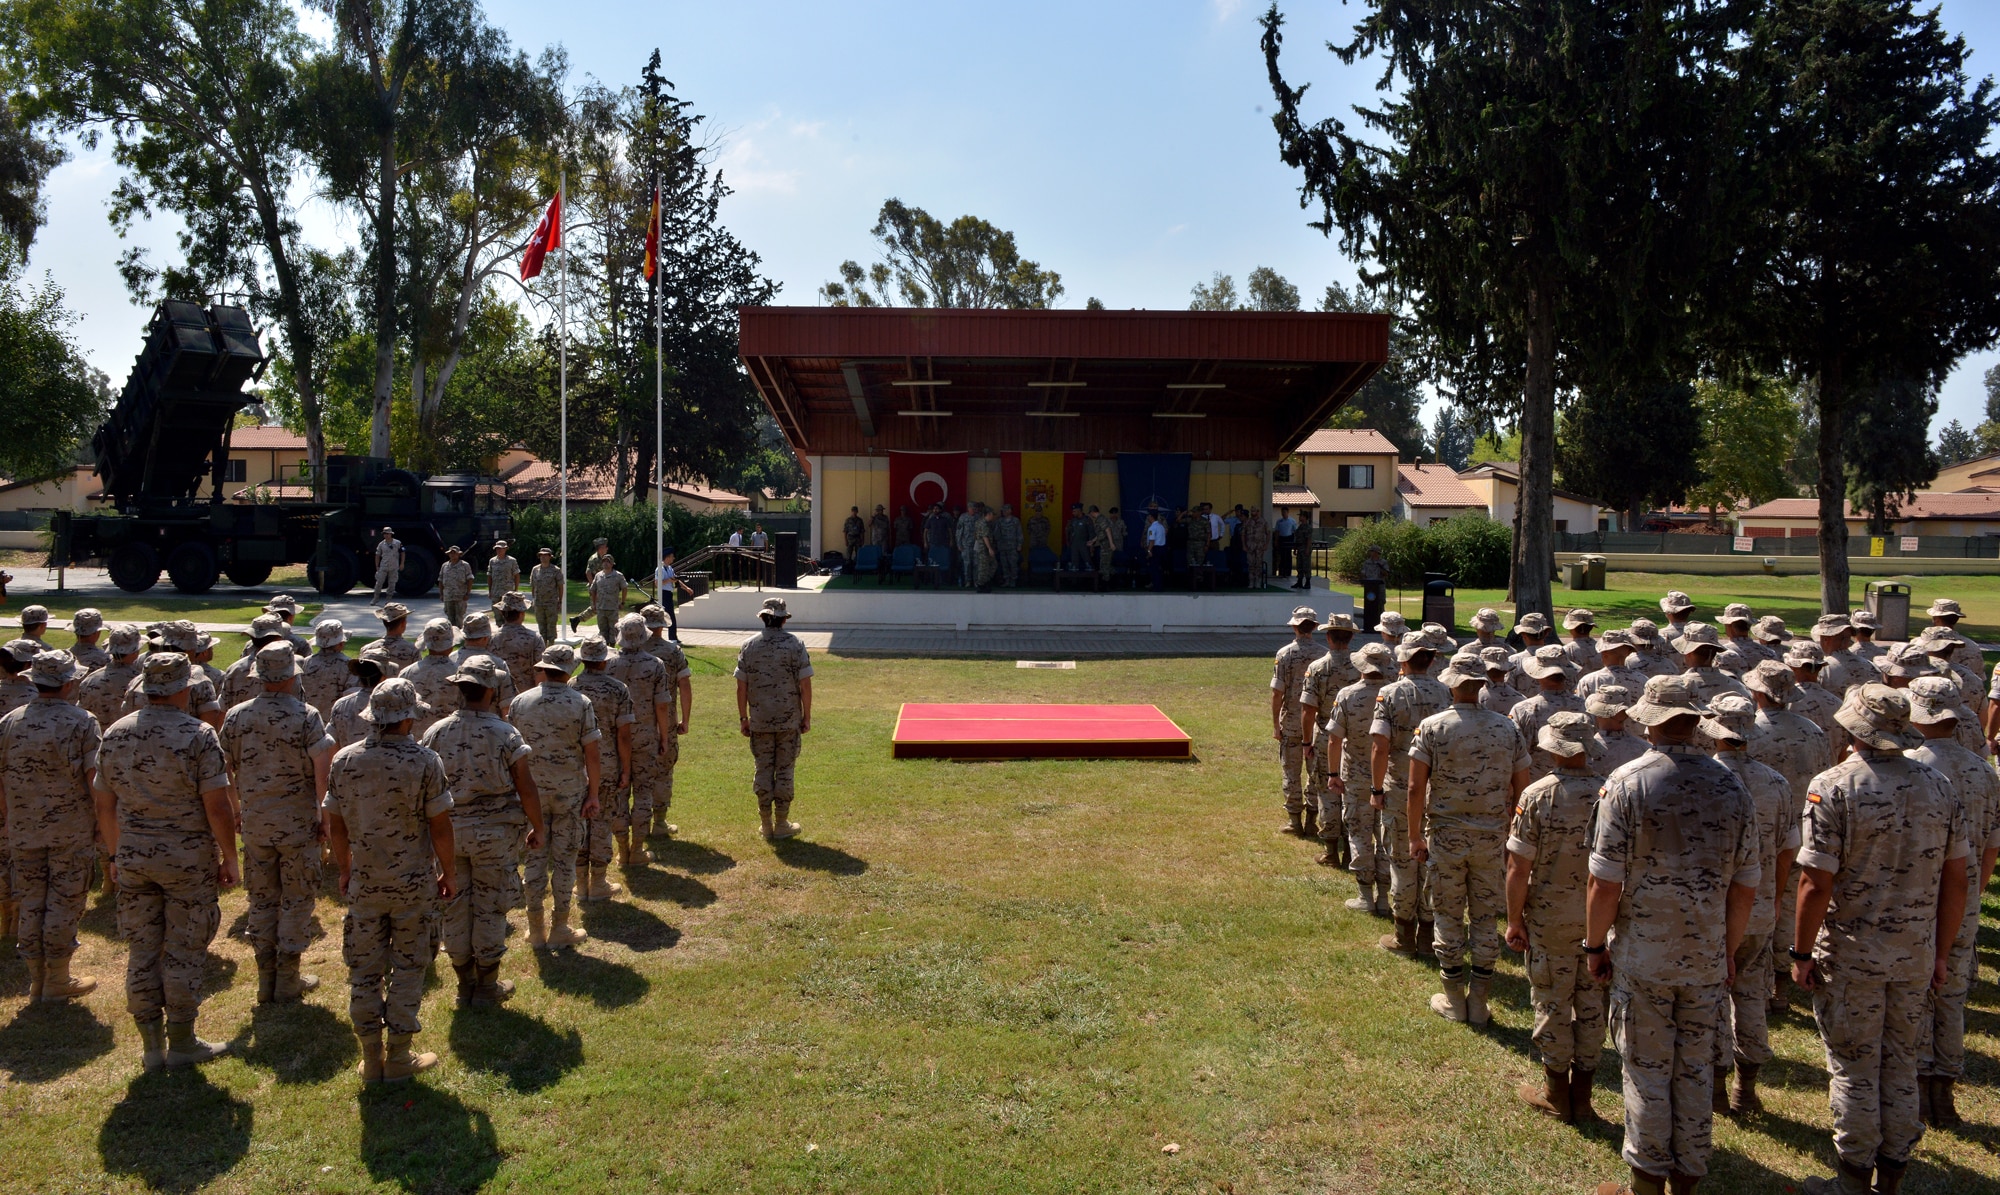 The Spanish Patriot Unit stands in formation awaiting the Transfer of Authority ceremony July 22, 2015, at Incirlik Air Base, Turkey. The Spanish are deployed to Incirlik in support of Operation Active Fence as part of the NATO patriot missile support deployment, which includes the missile batteries operated by the U.S. and Germany located respectively in two other areas within Turkey: Gaziantep and Kahramanmaras. (U.S. Air Force photo by Senior Airman Michael Battles/Released)